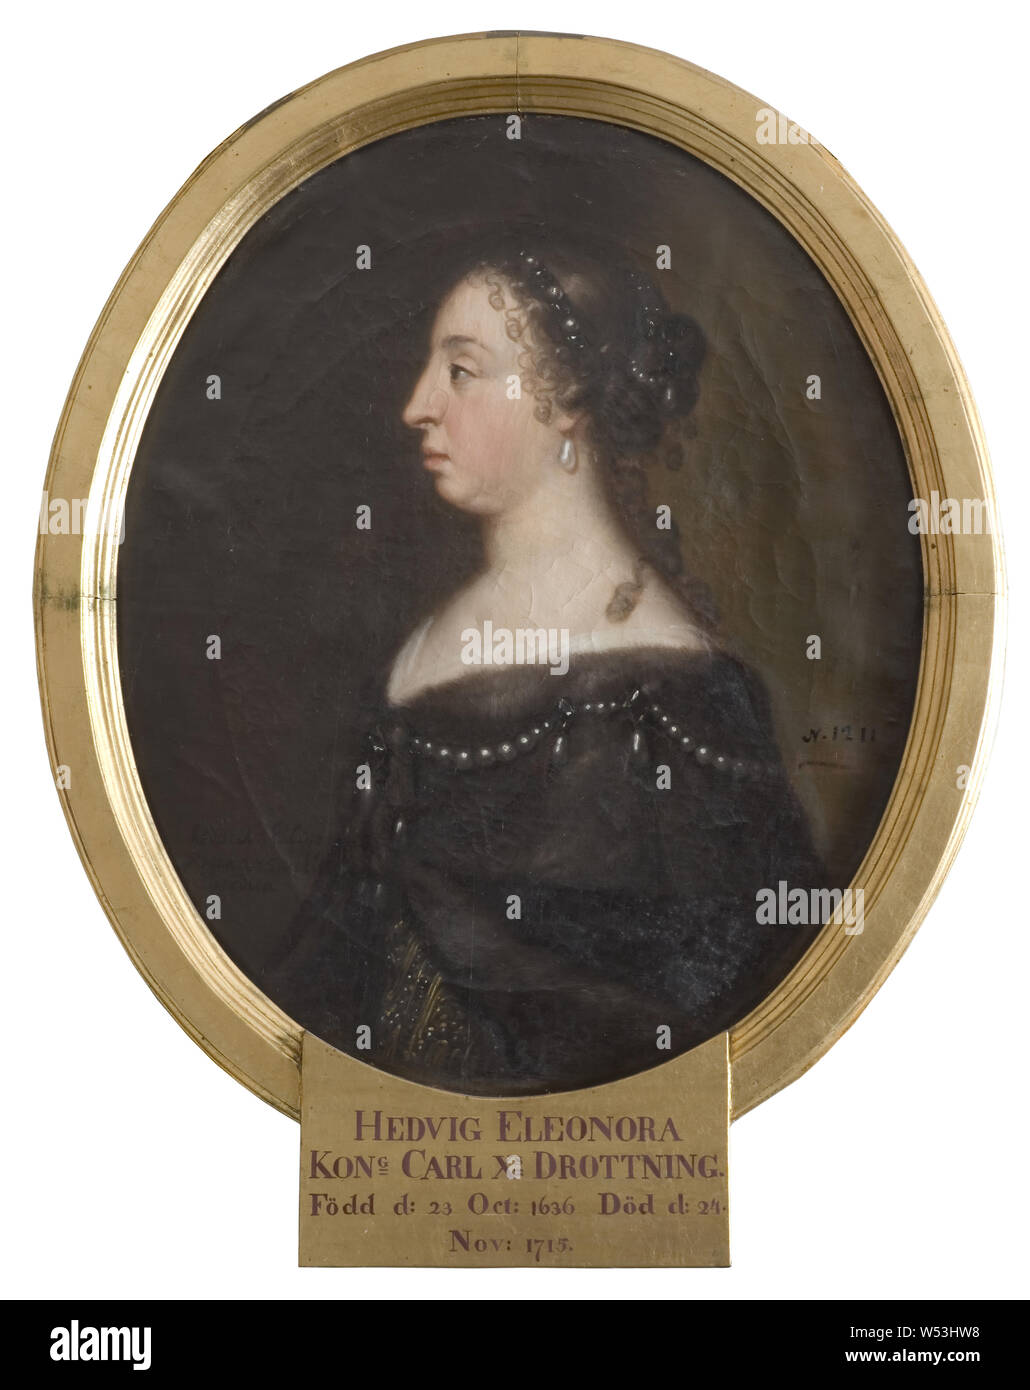 Attributed to David Klöcker Ehrenstrahl, Queen Hedvig Eleonora, Hedvig Eleonora, 1636-1715, Princess of Holstein-Gottorp, Queen of Sweden, painting, portrait, Hedvig Eleonora of Holstein-Gottorp, oil on canvas, Height, 72, cm (28.3 inches), Width, 59 cm (23.2 inches) Stock Photo